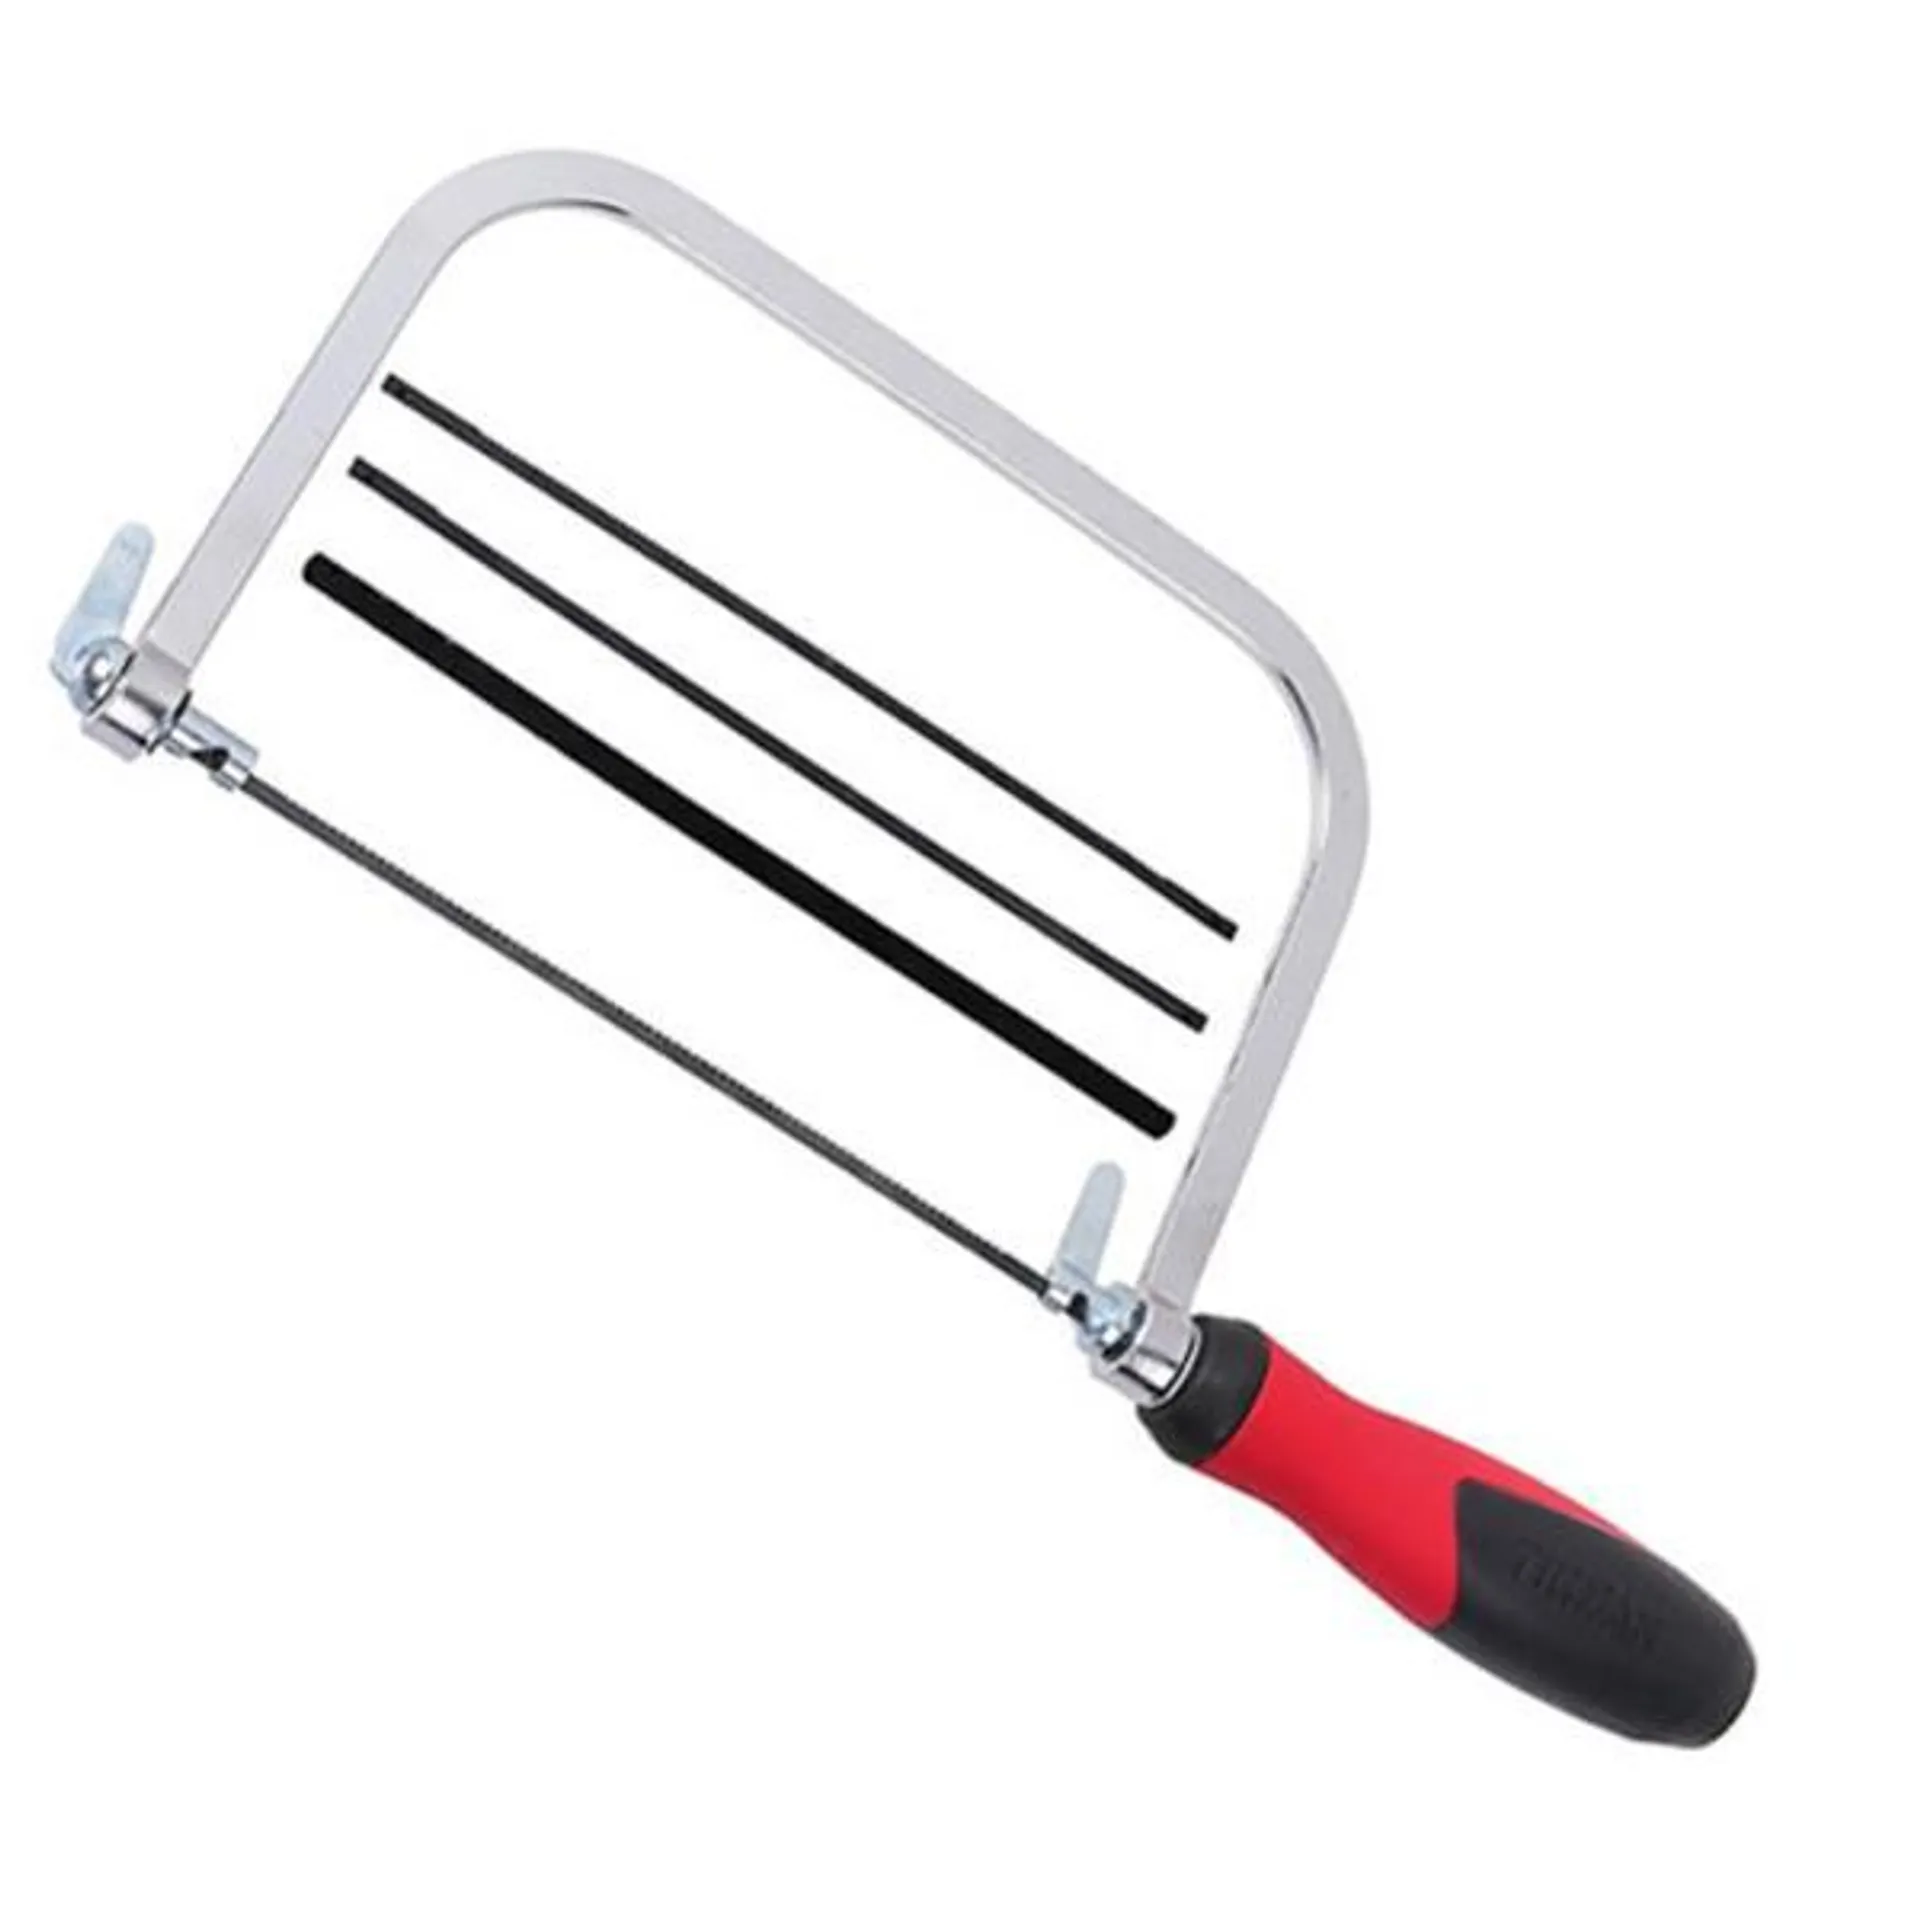 Coping Saw Set With Blades